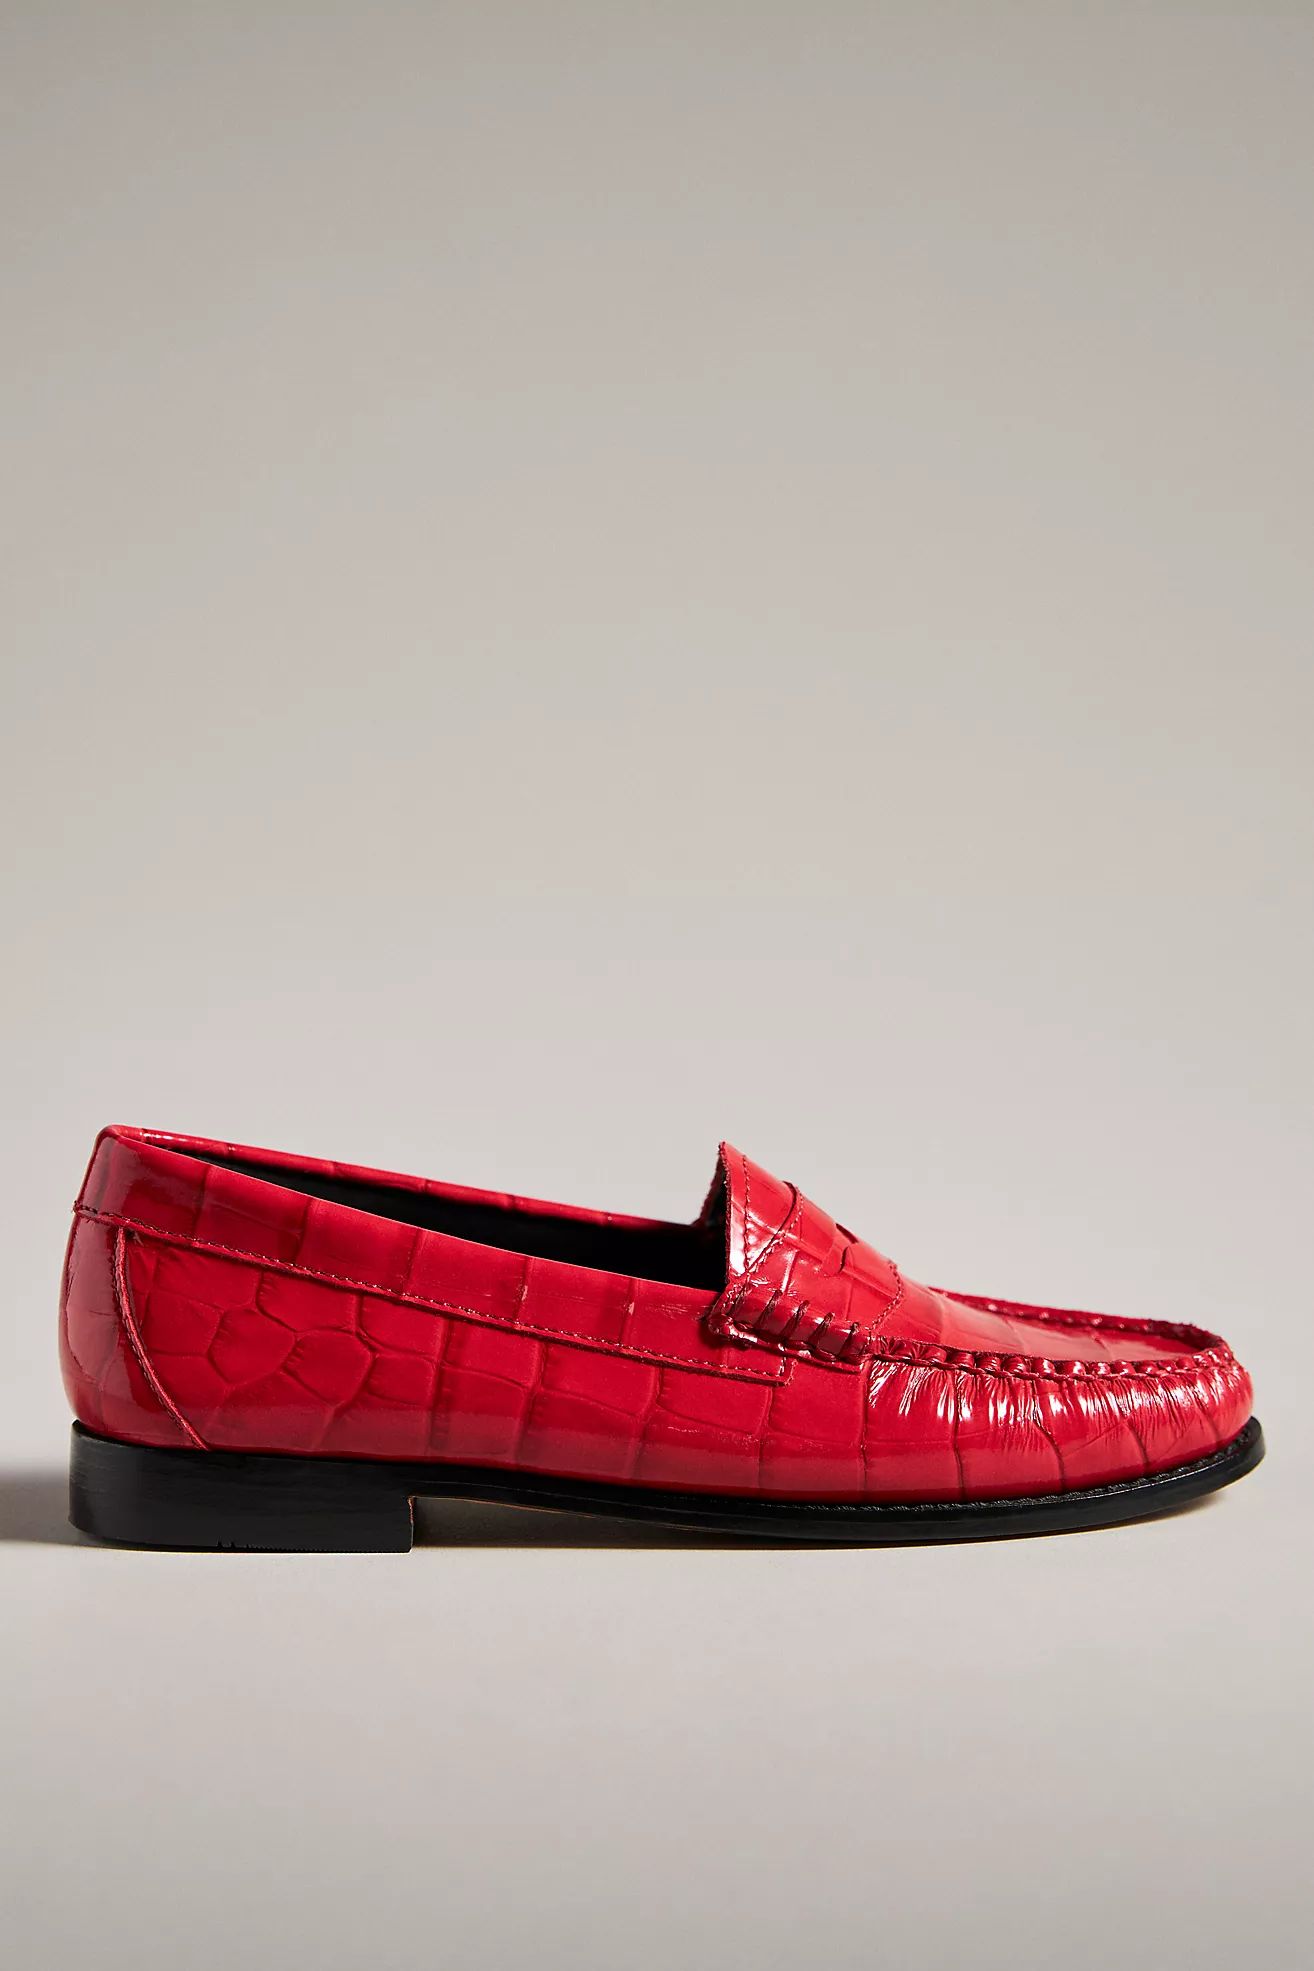 G.H.BASS Whitney Coco Loafers | Anthropologie (US)